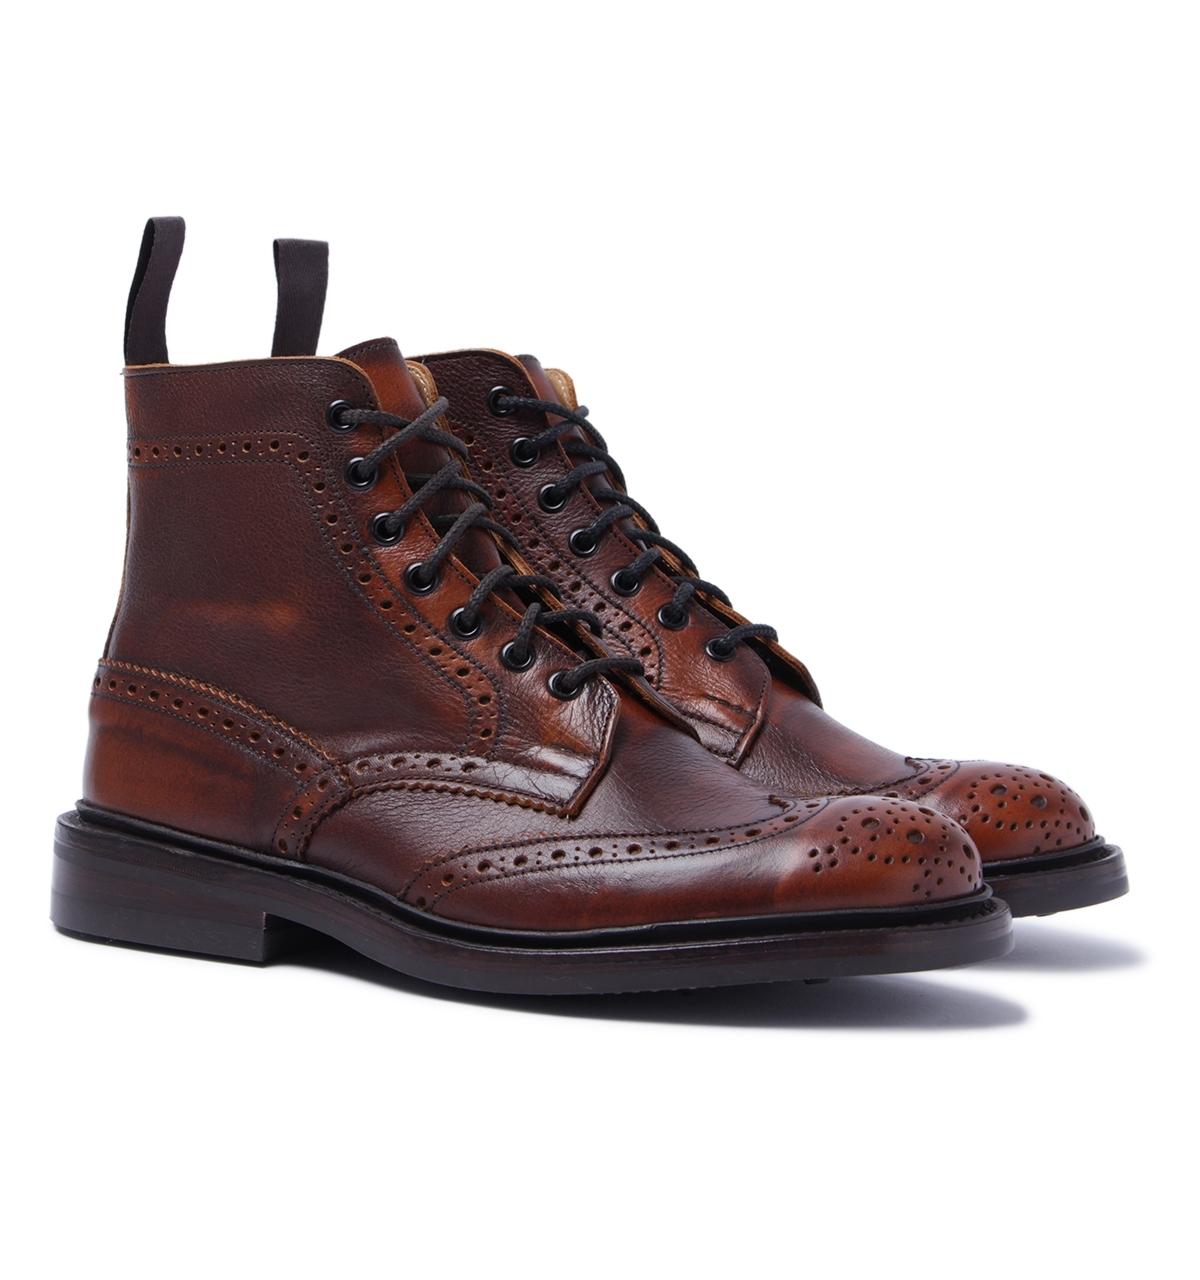 Tricker's Tricker's Stow Caramel Kudu Leather Brogue Country Boots in ...